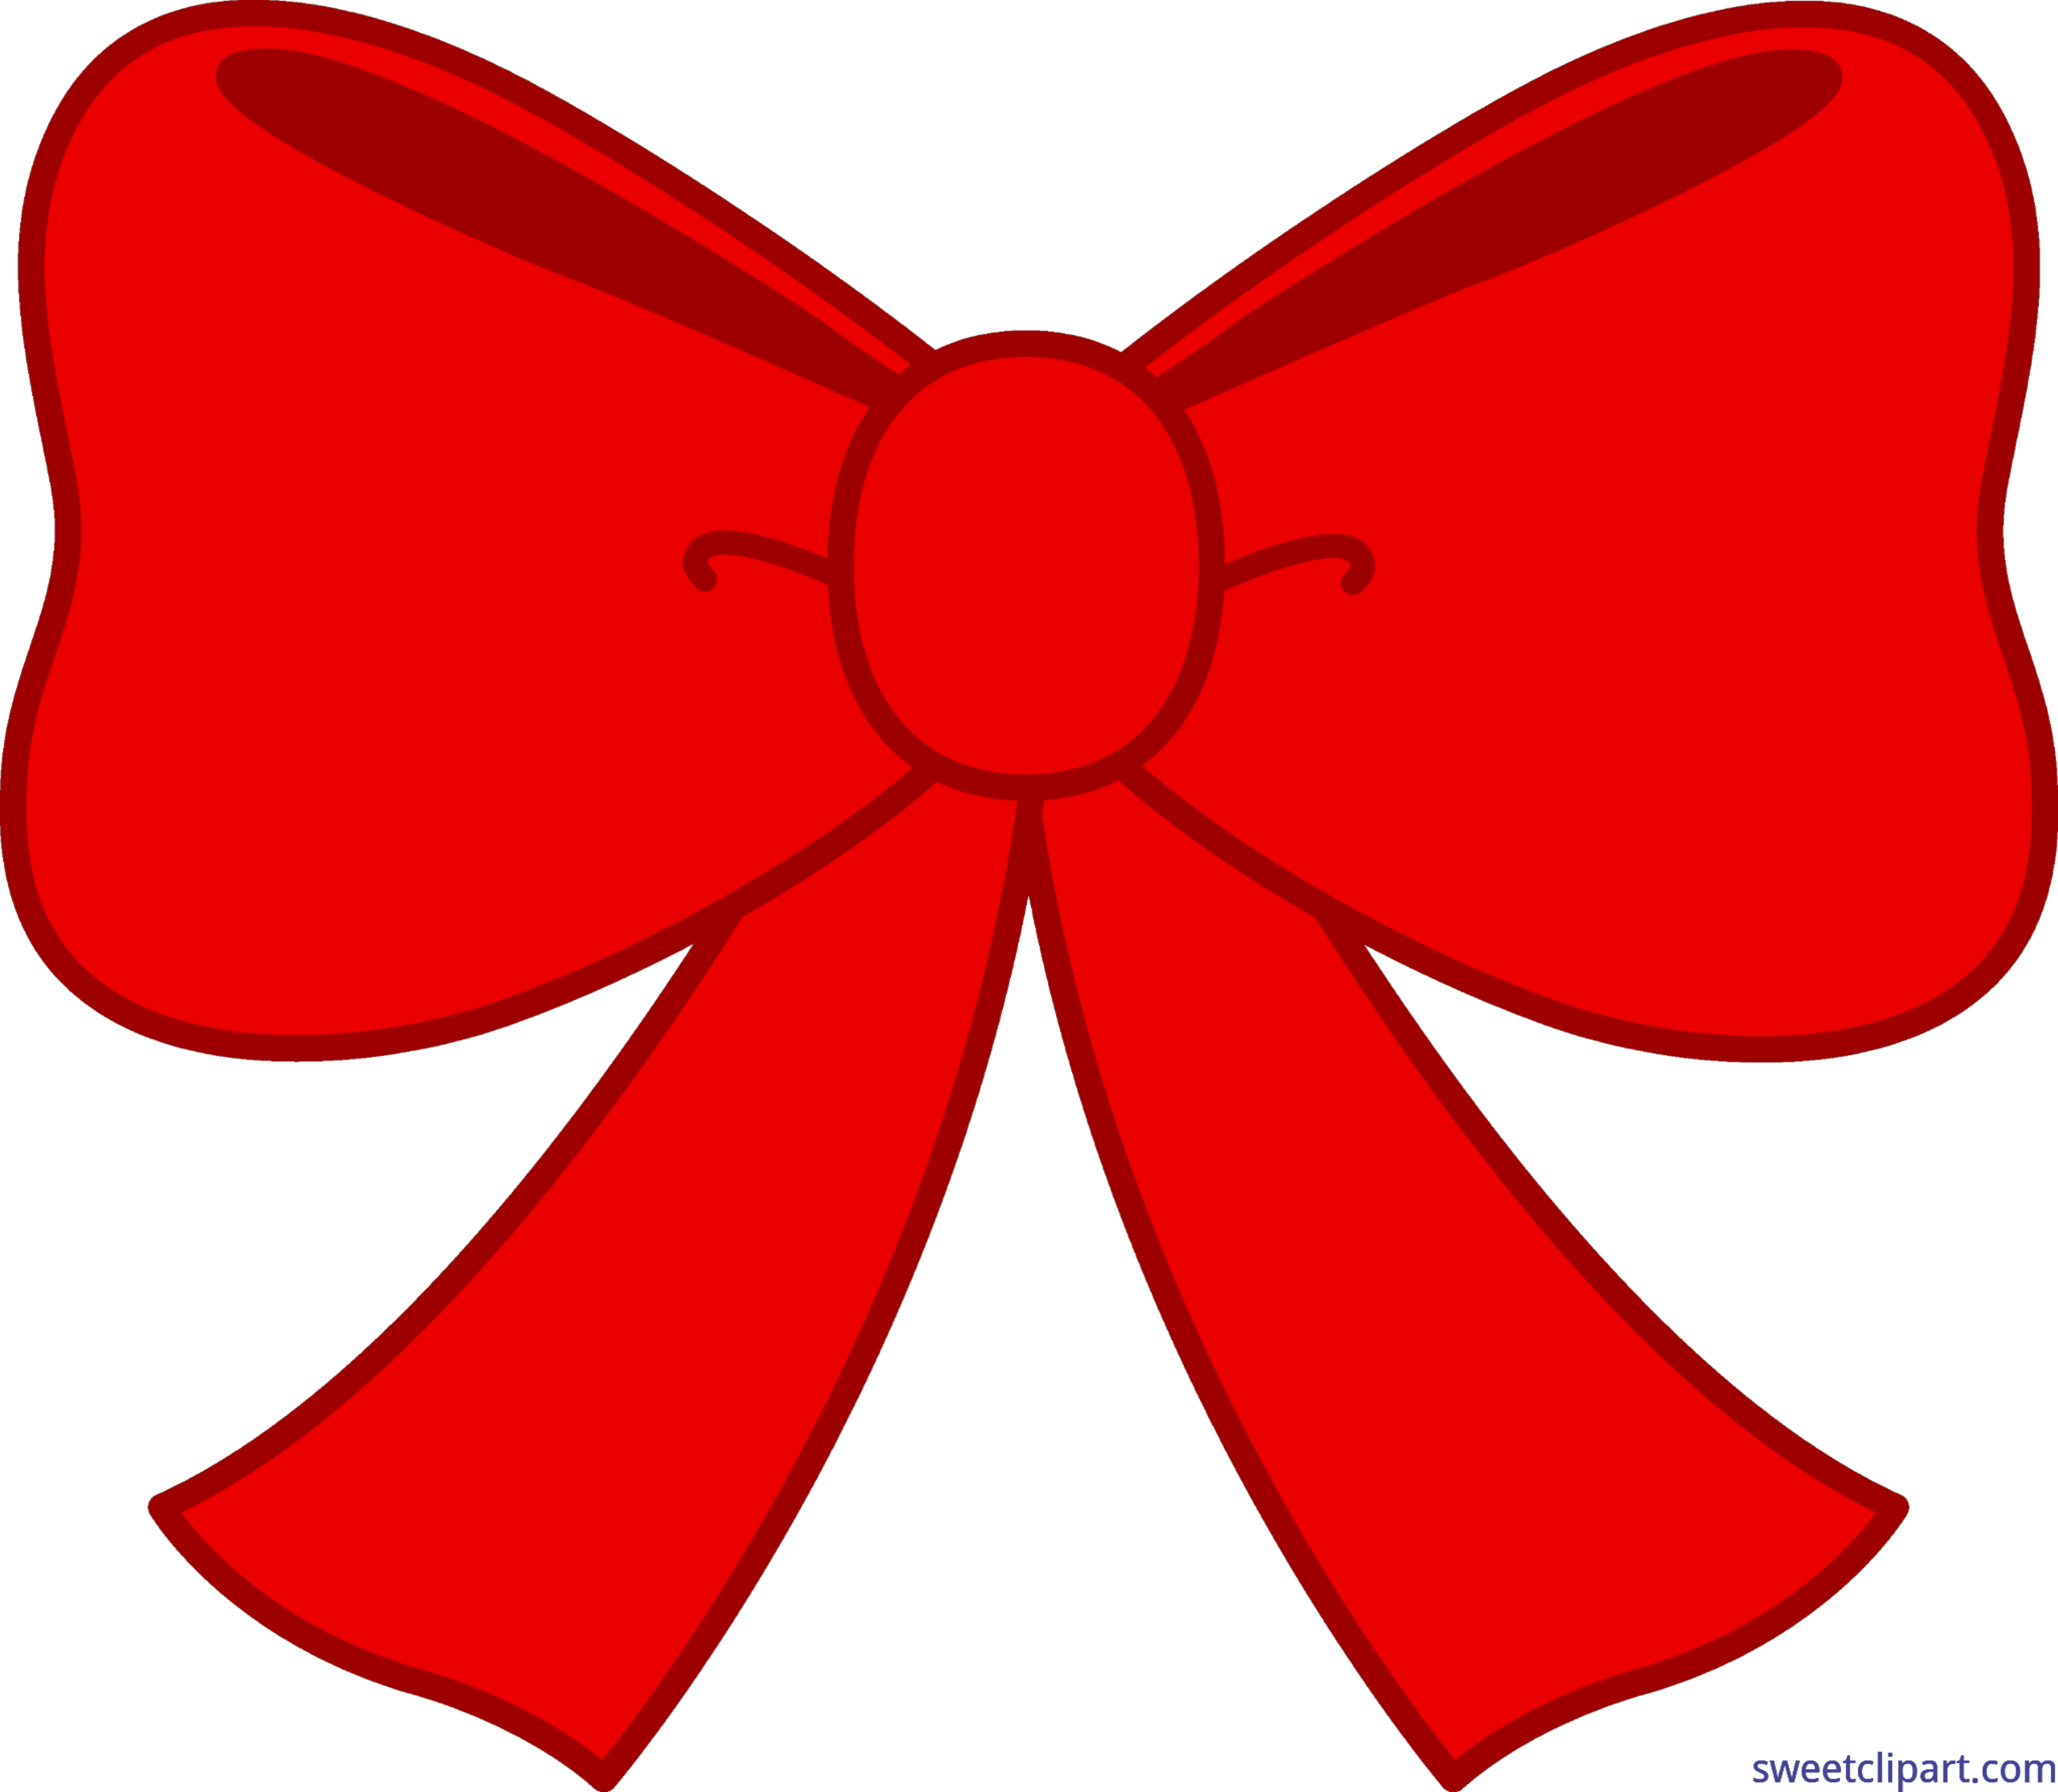 https://sweetclipart.com/wp-content/uploads/Cute-Red-Bow-Clip-Art.png